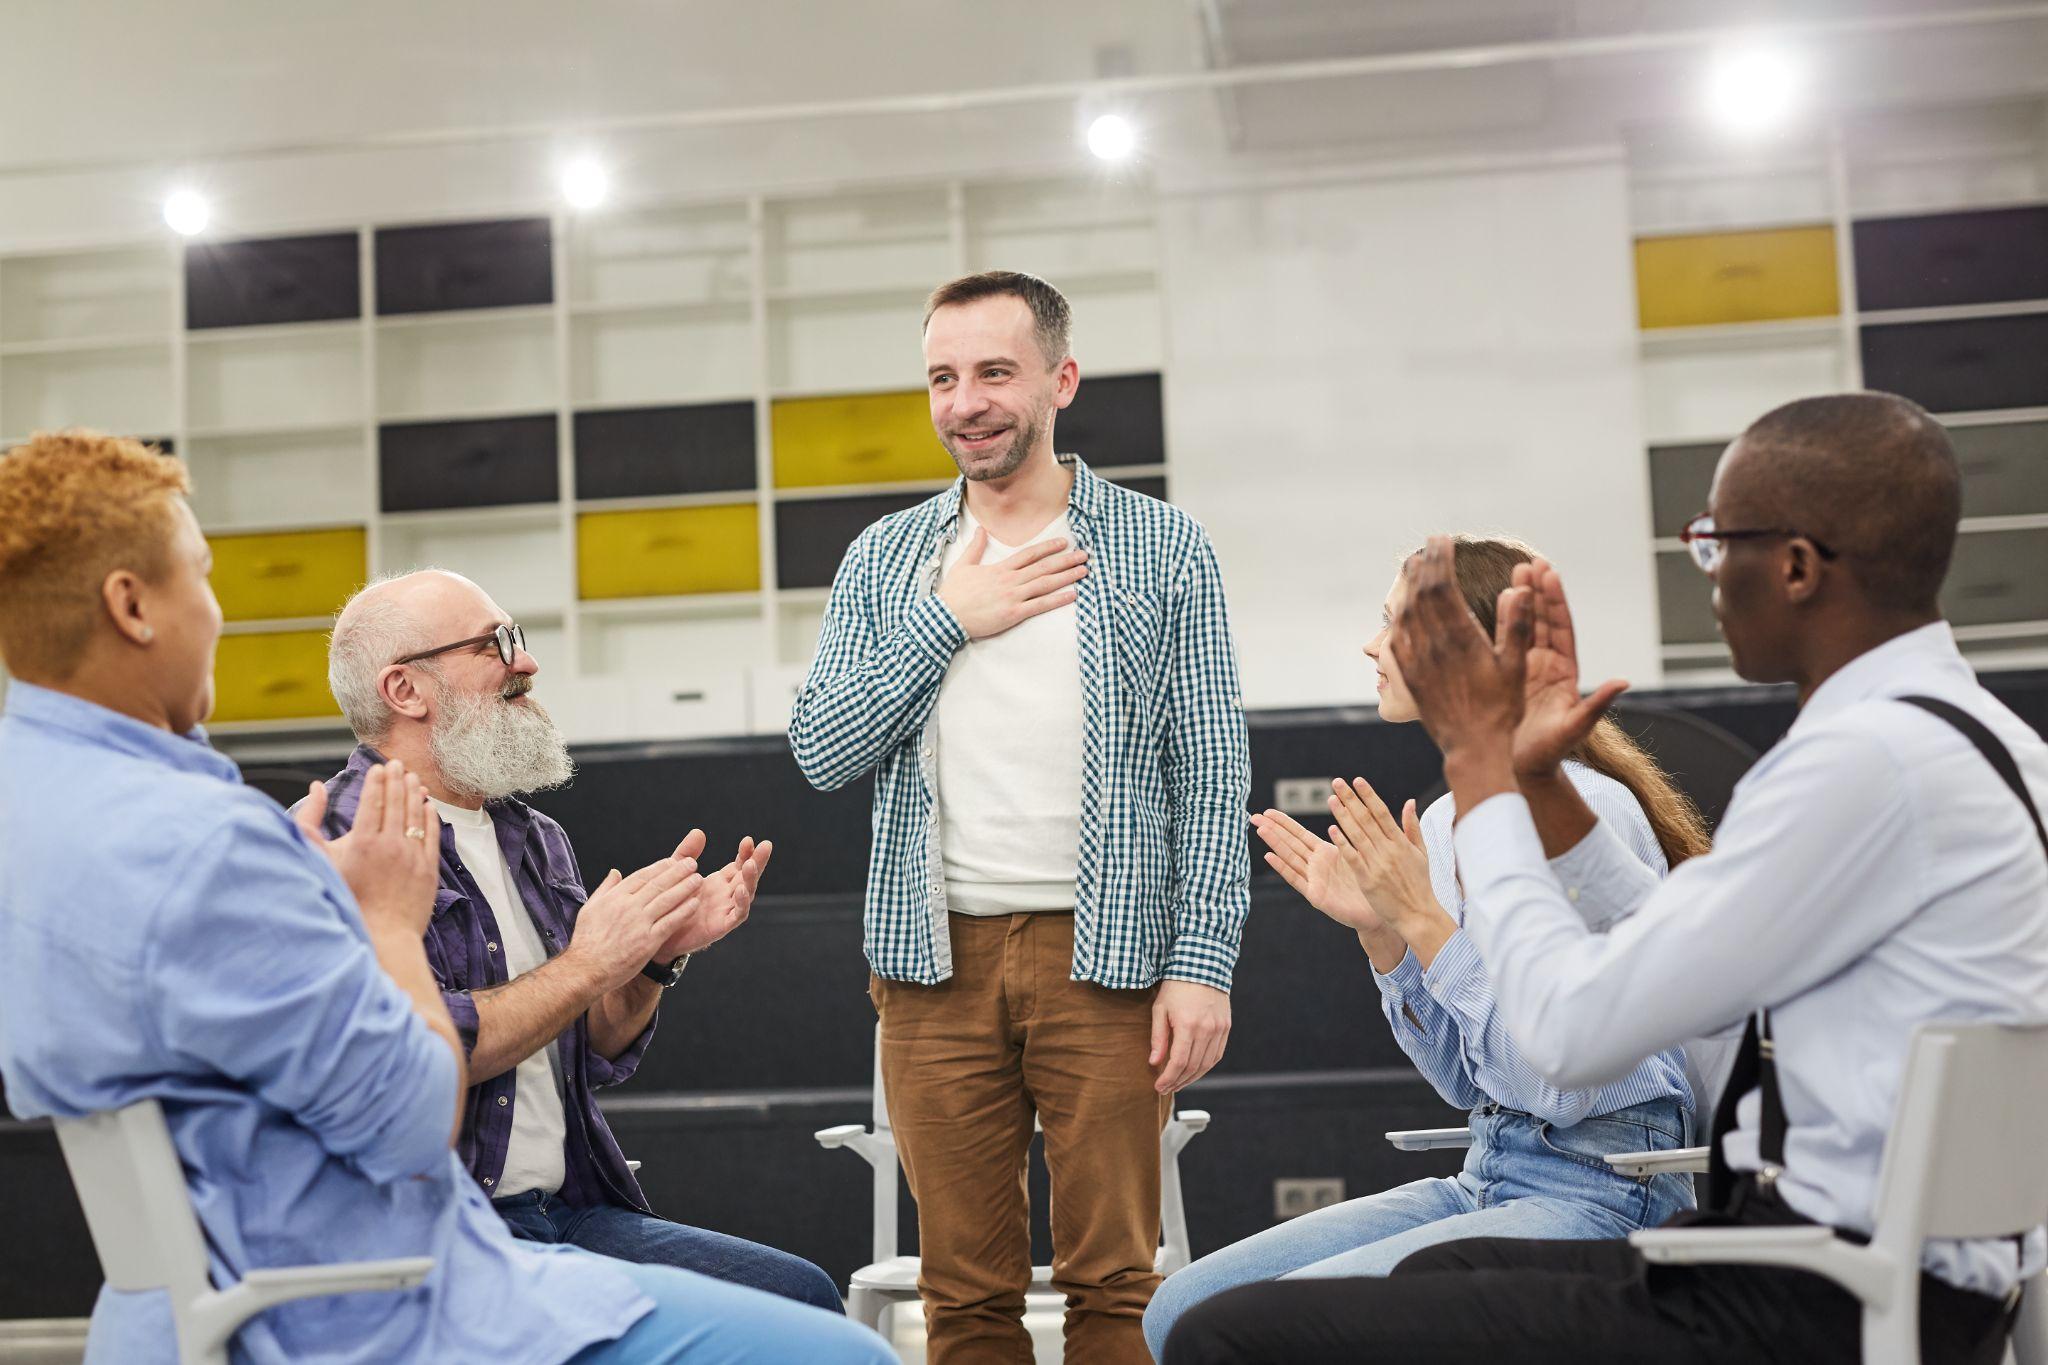 Portrait of smiling mature man introducing himself during therapy session in support group to people clapping